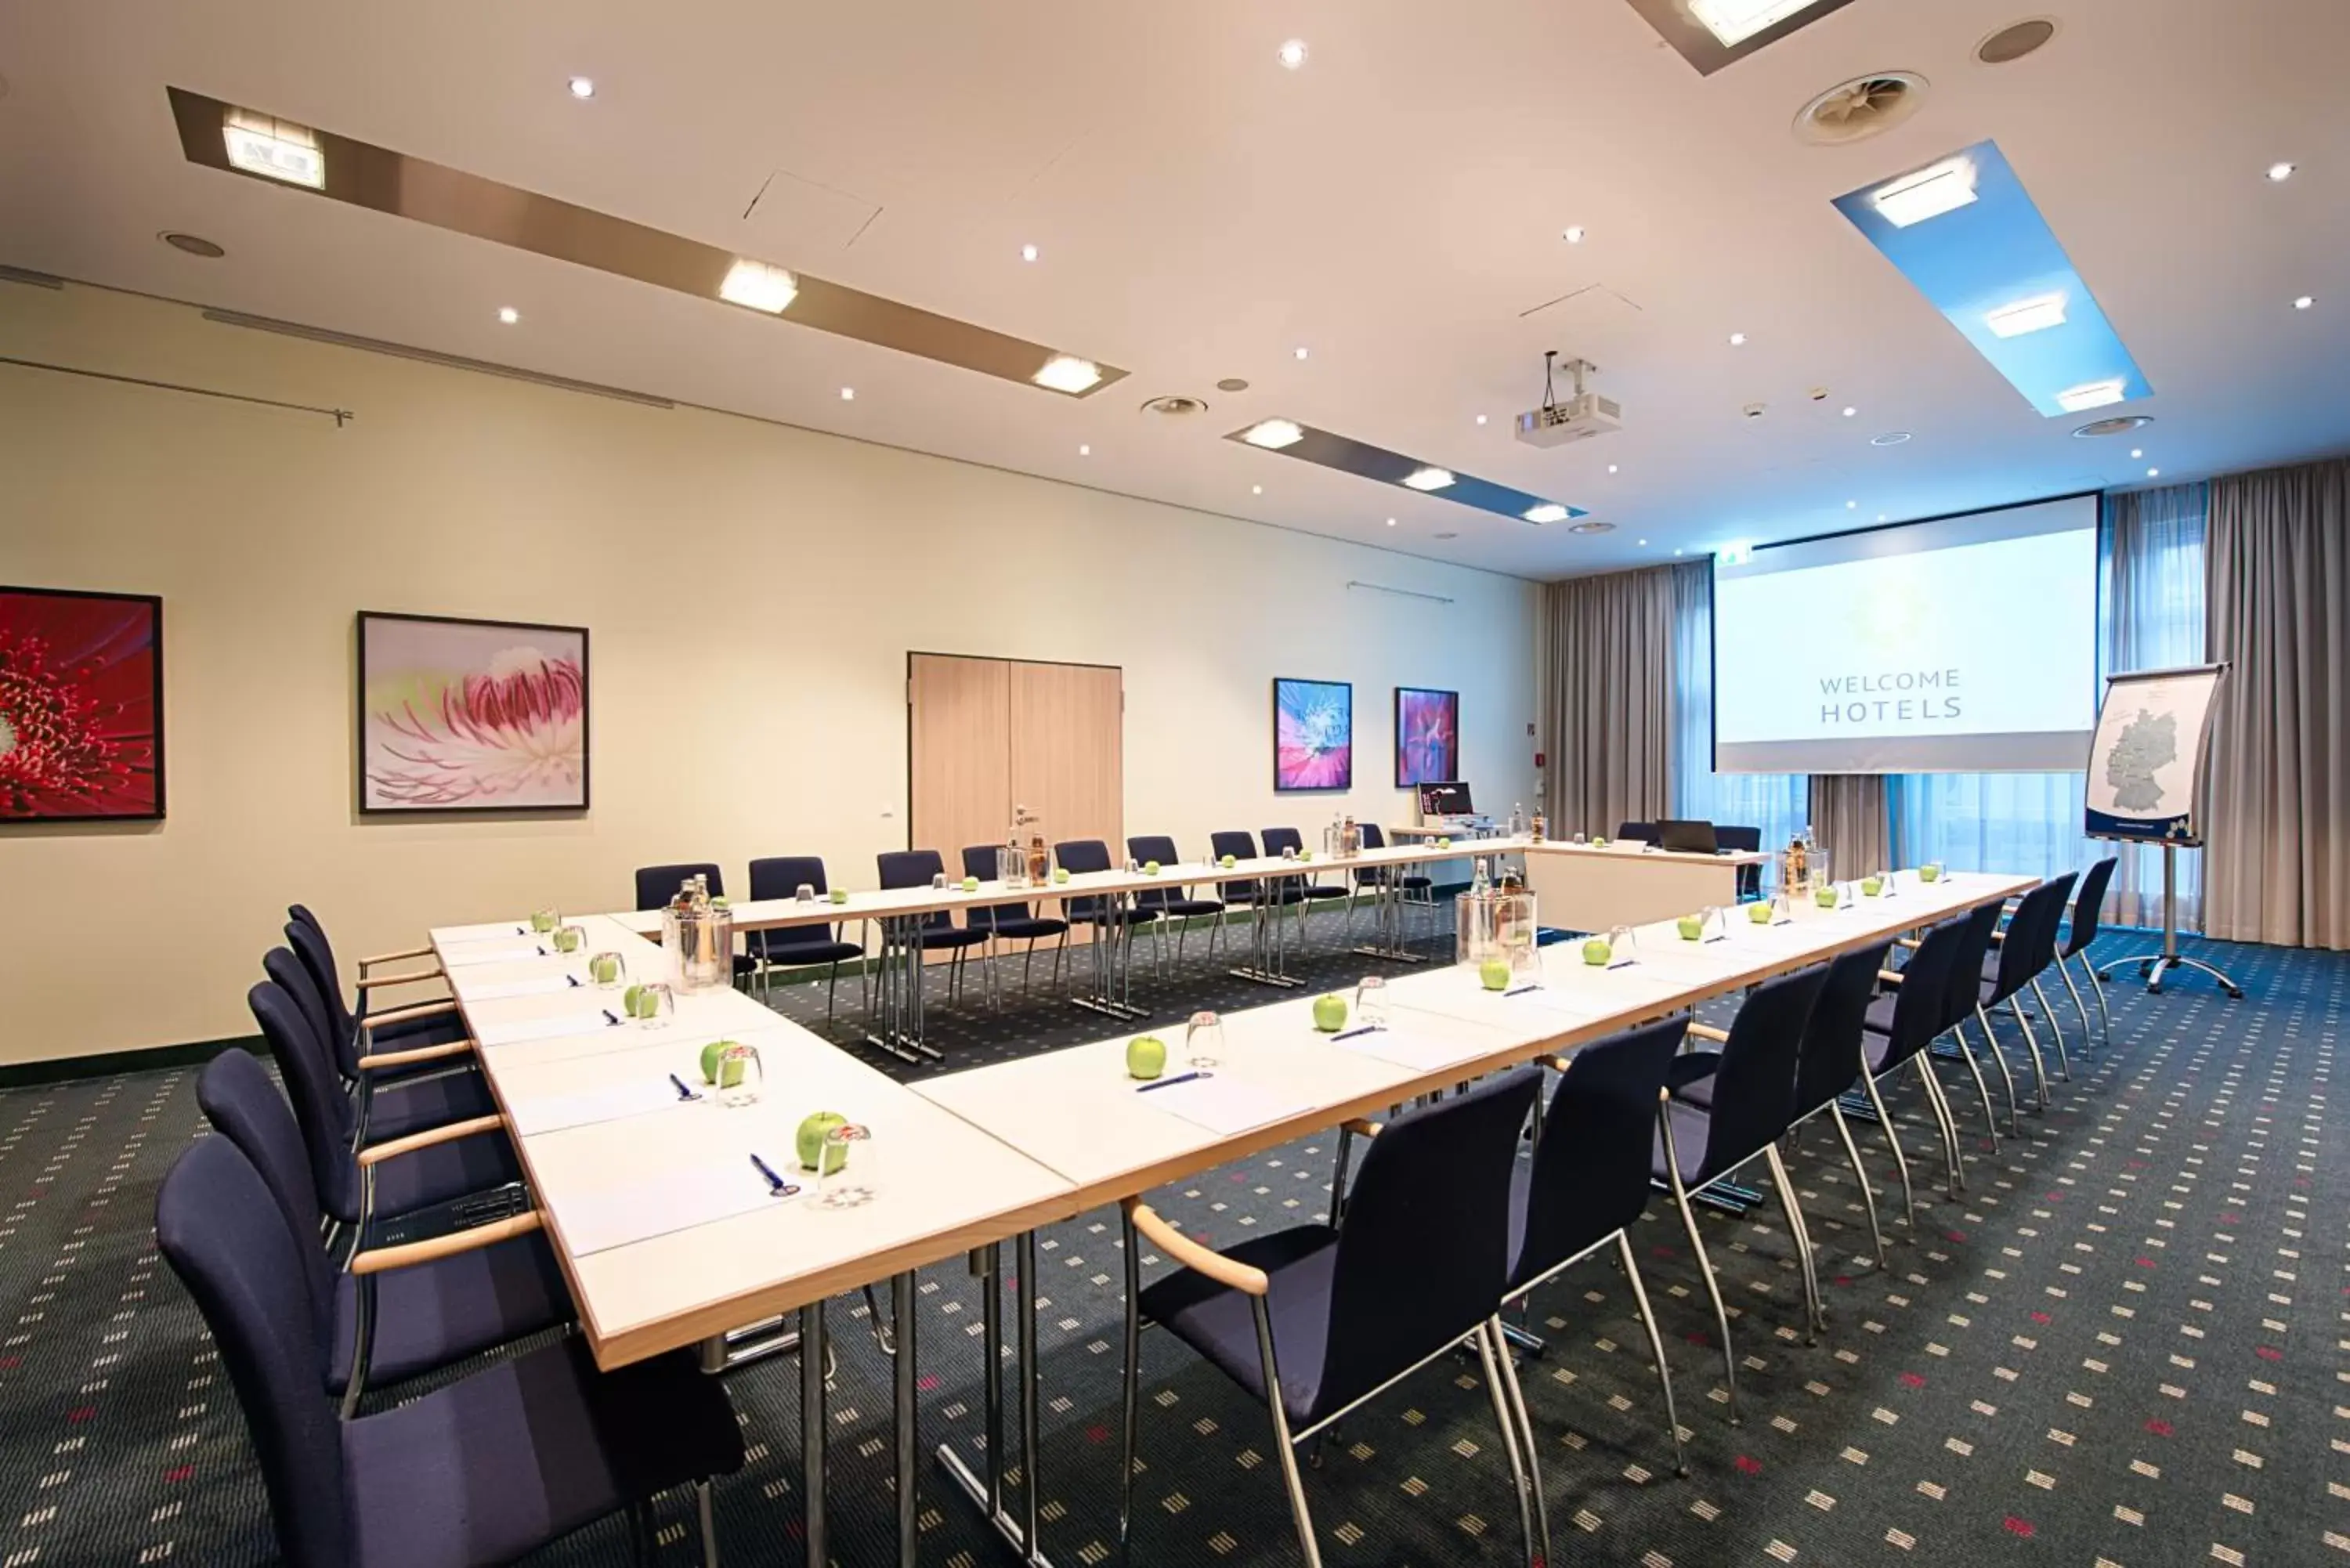 Business facilities in Welcome Hotel Paderborn